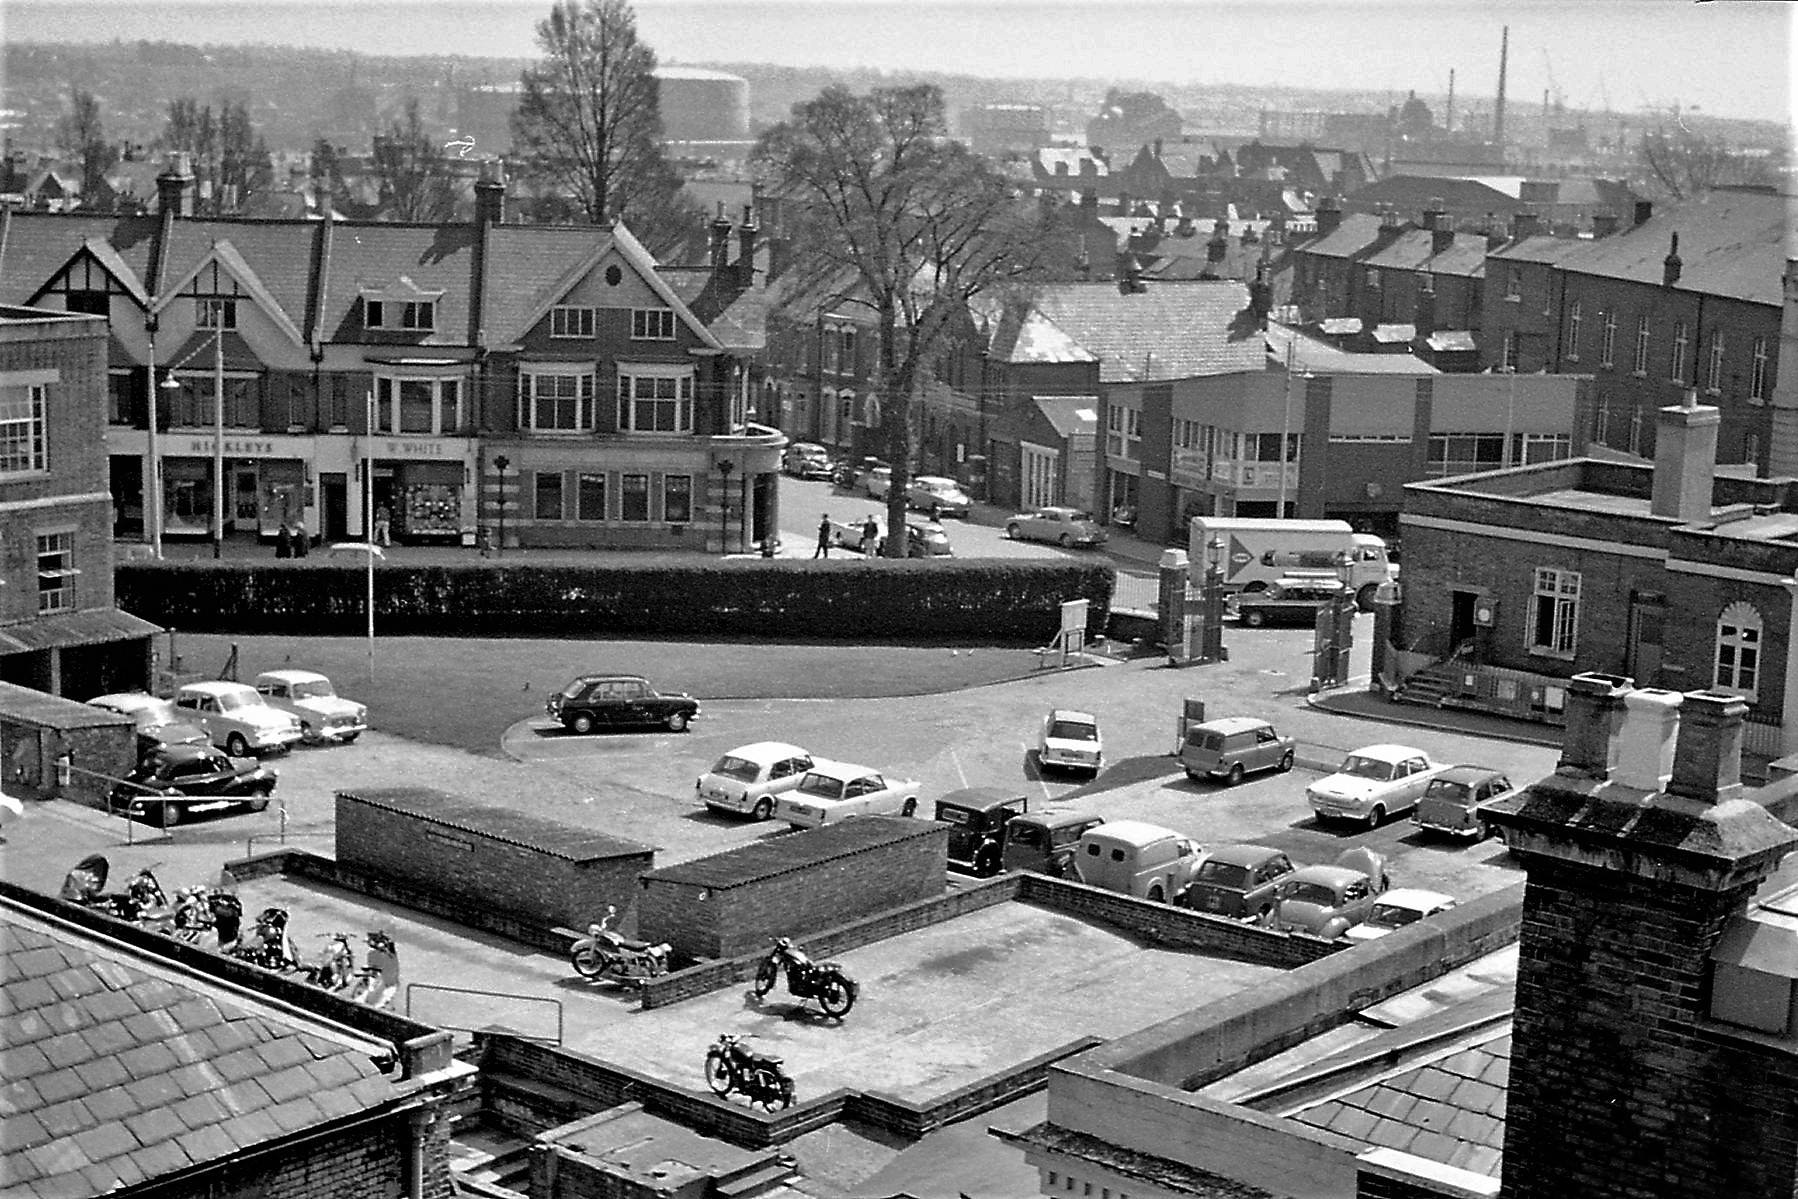 View from the roof of London Road in 1967